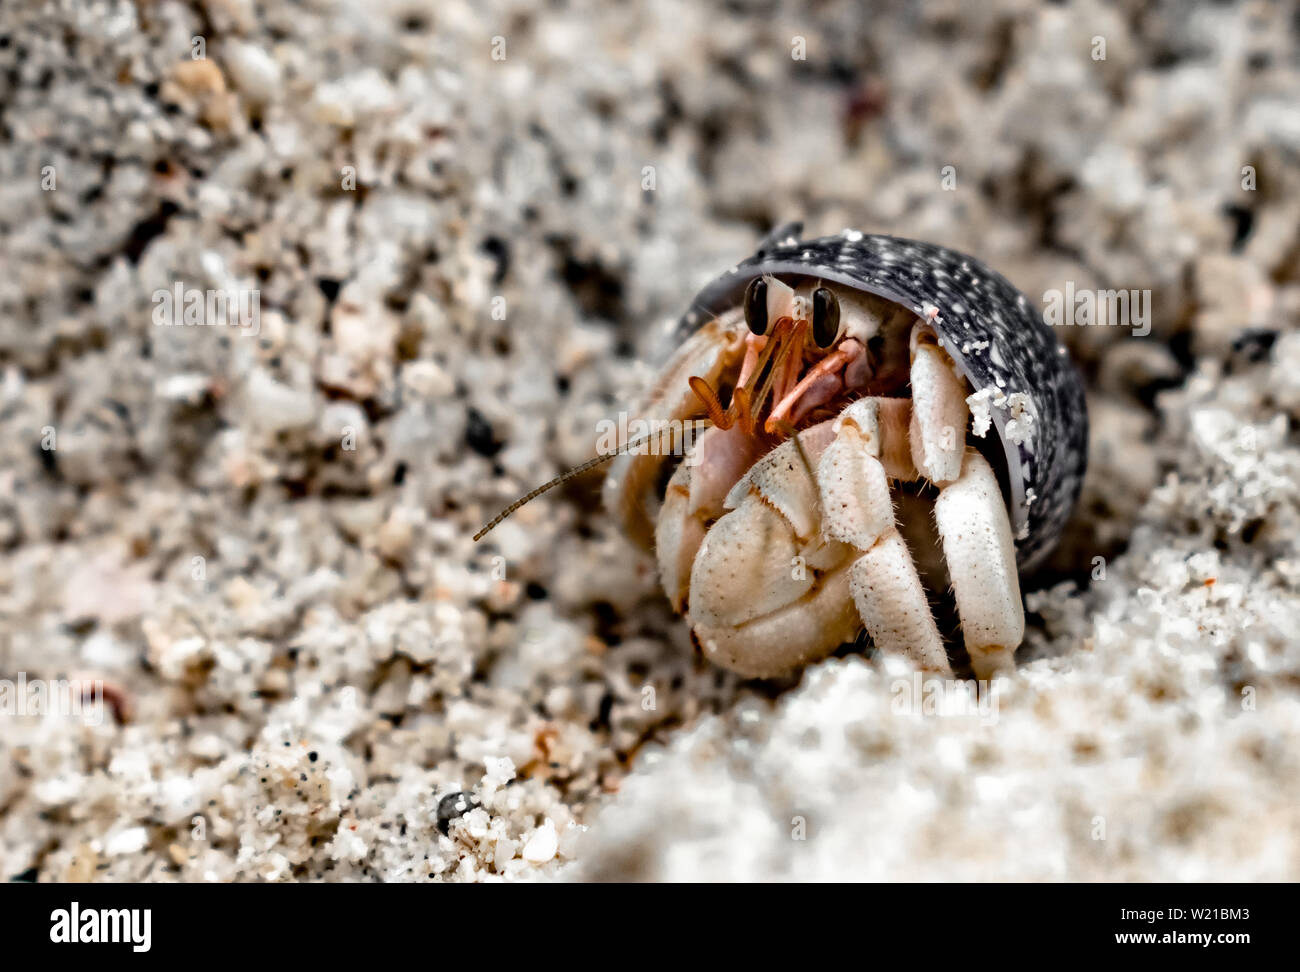 Coenobita rugosus, trivially called Hermit Crab, peeping from its shell, to observe surroundings through its flagellum and antennae. Stock Photo